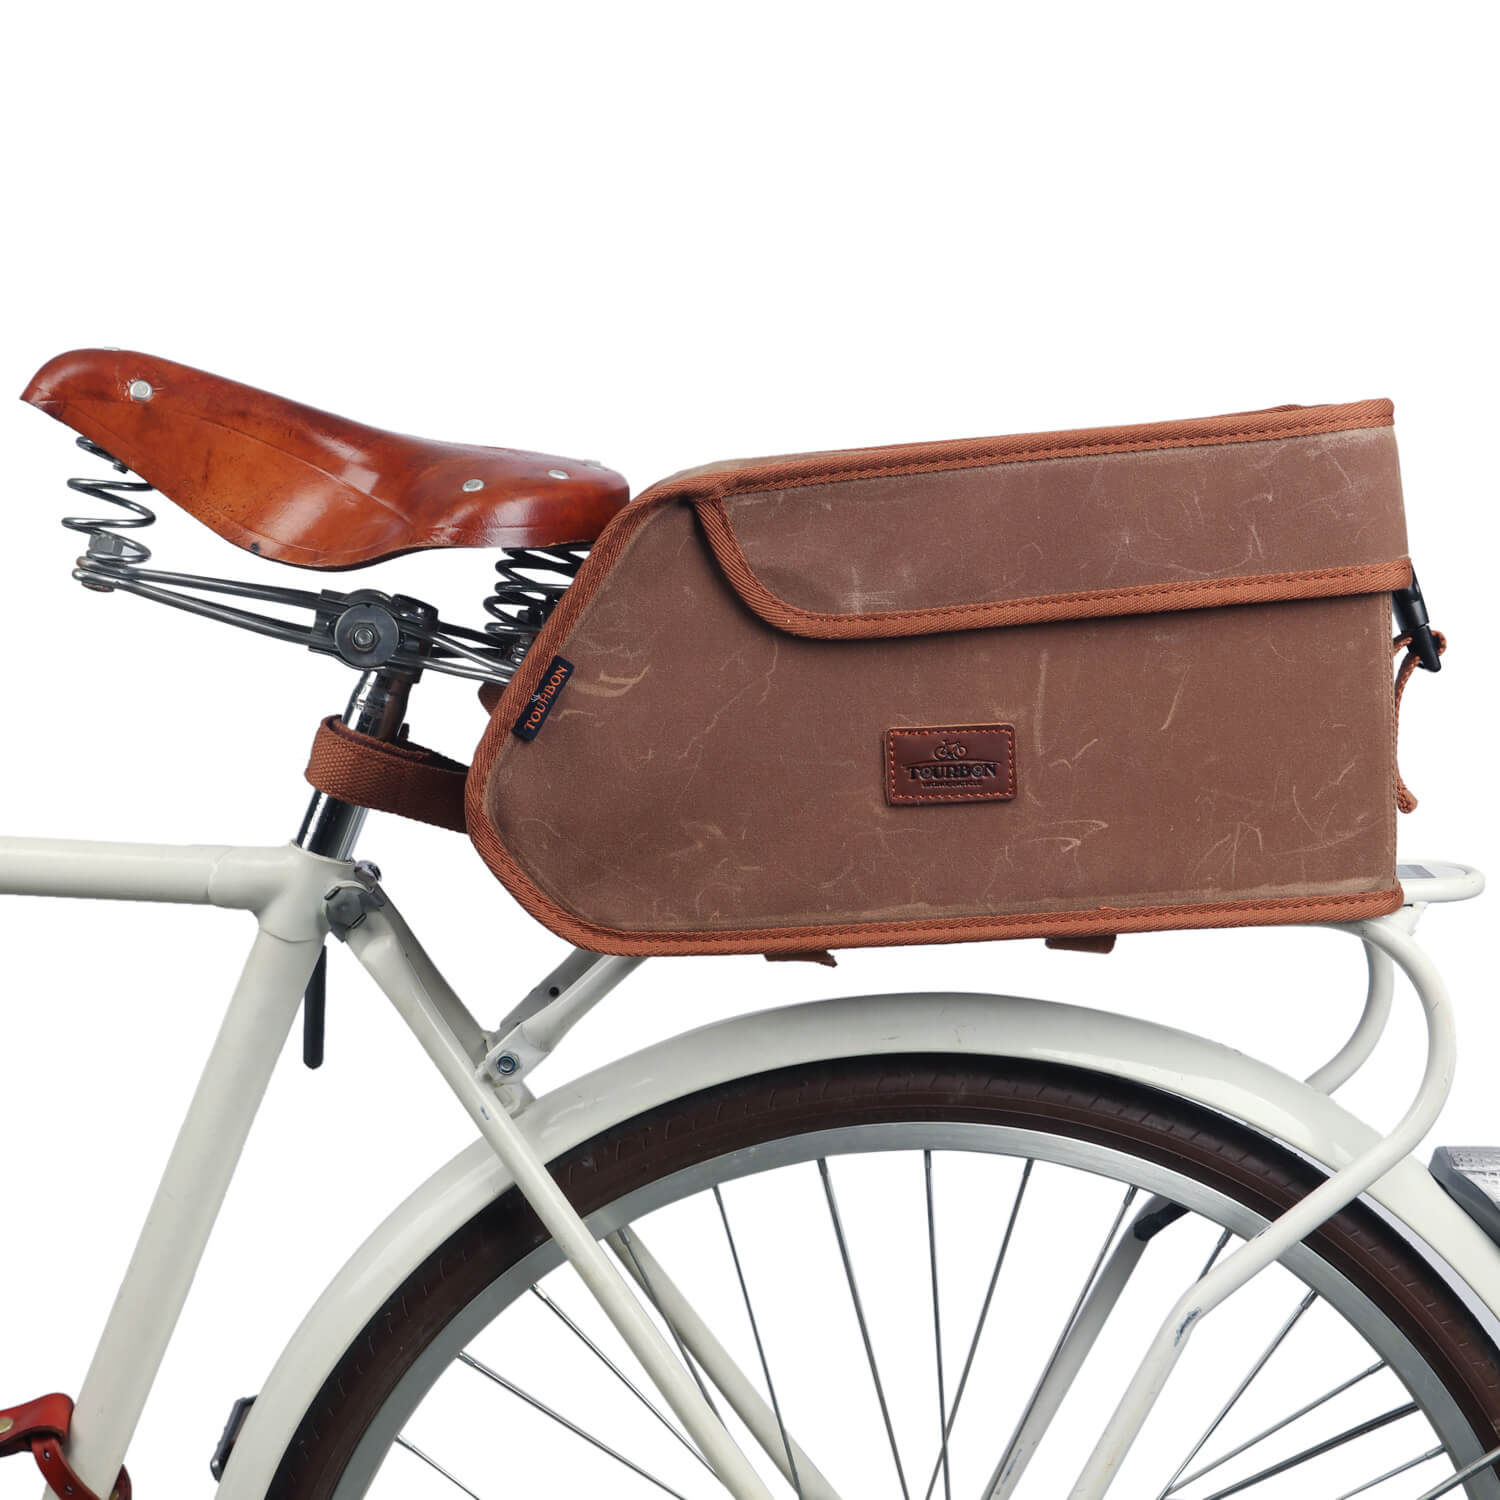 Bike Pannier Bag Cycling Double Panniers Bag Pack Bicycle Saddle Bags Rear Rack  Bicycle Rear Seat Carrier Canvas Bag Bicycle Truck Bag Wyz12997  China  Bicycle Bicycle Rear Seat Bag  MadeinChinacom